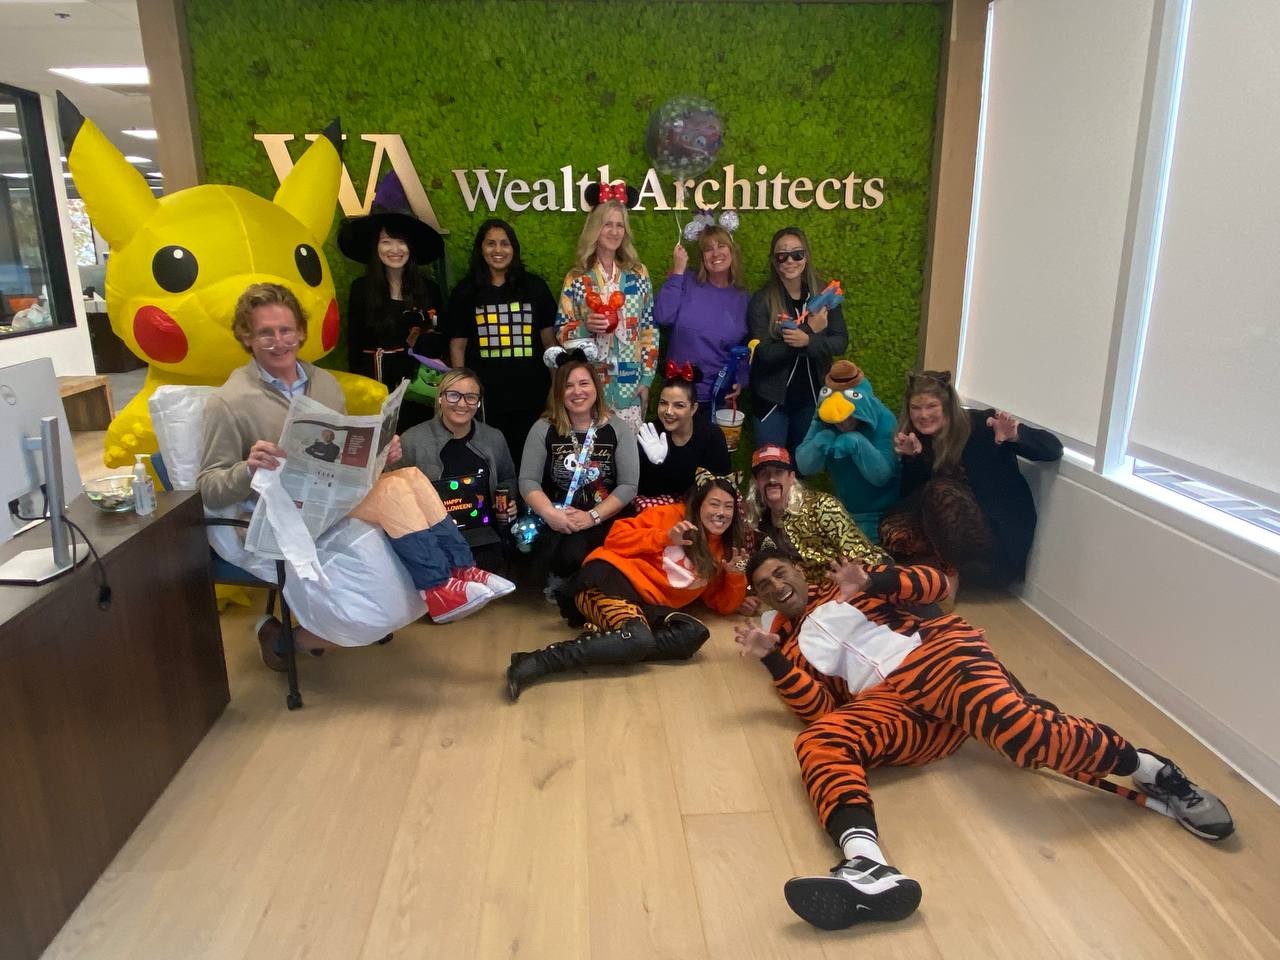 Team event - Halloween dress-up and costume contest